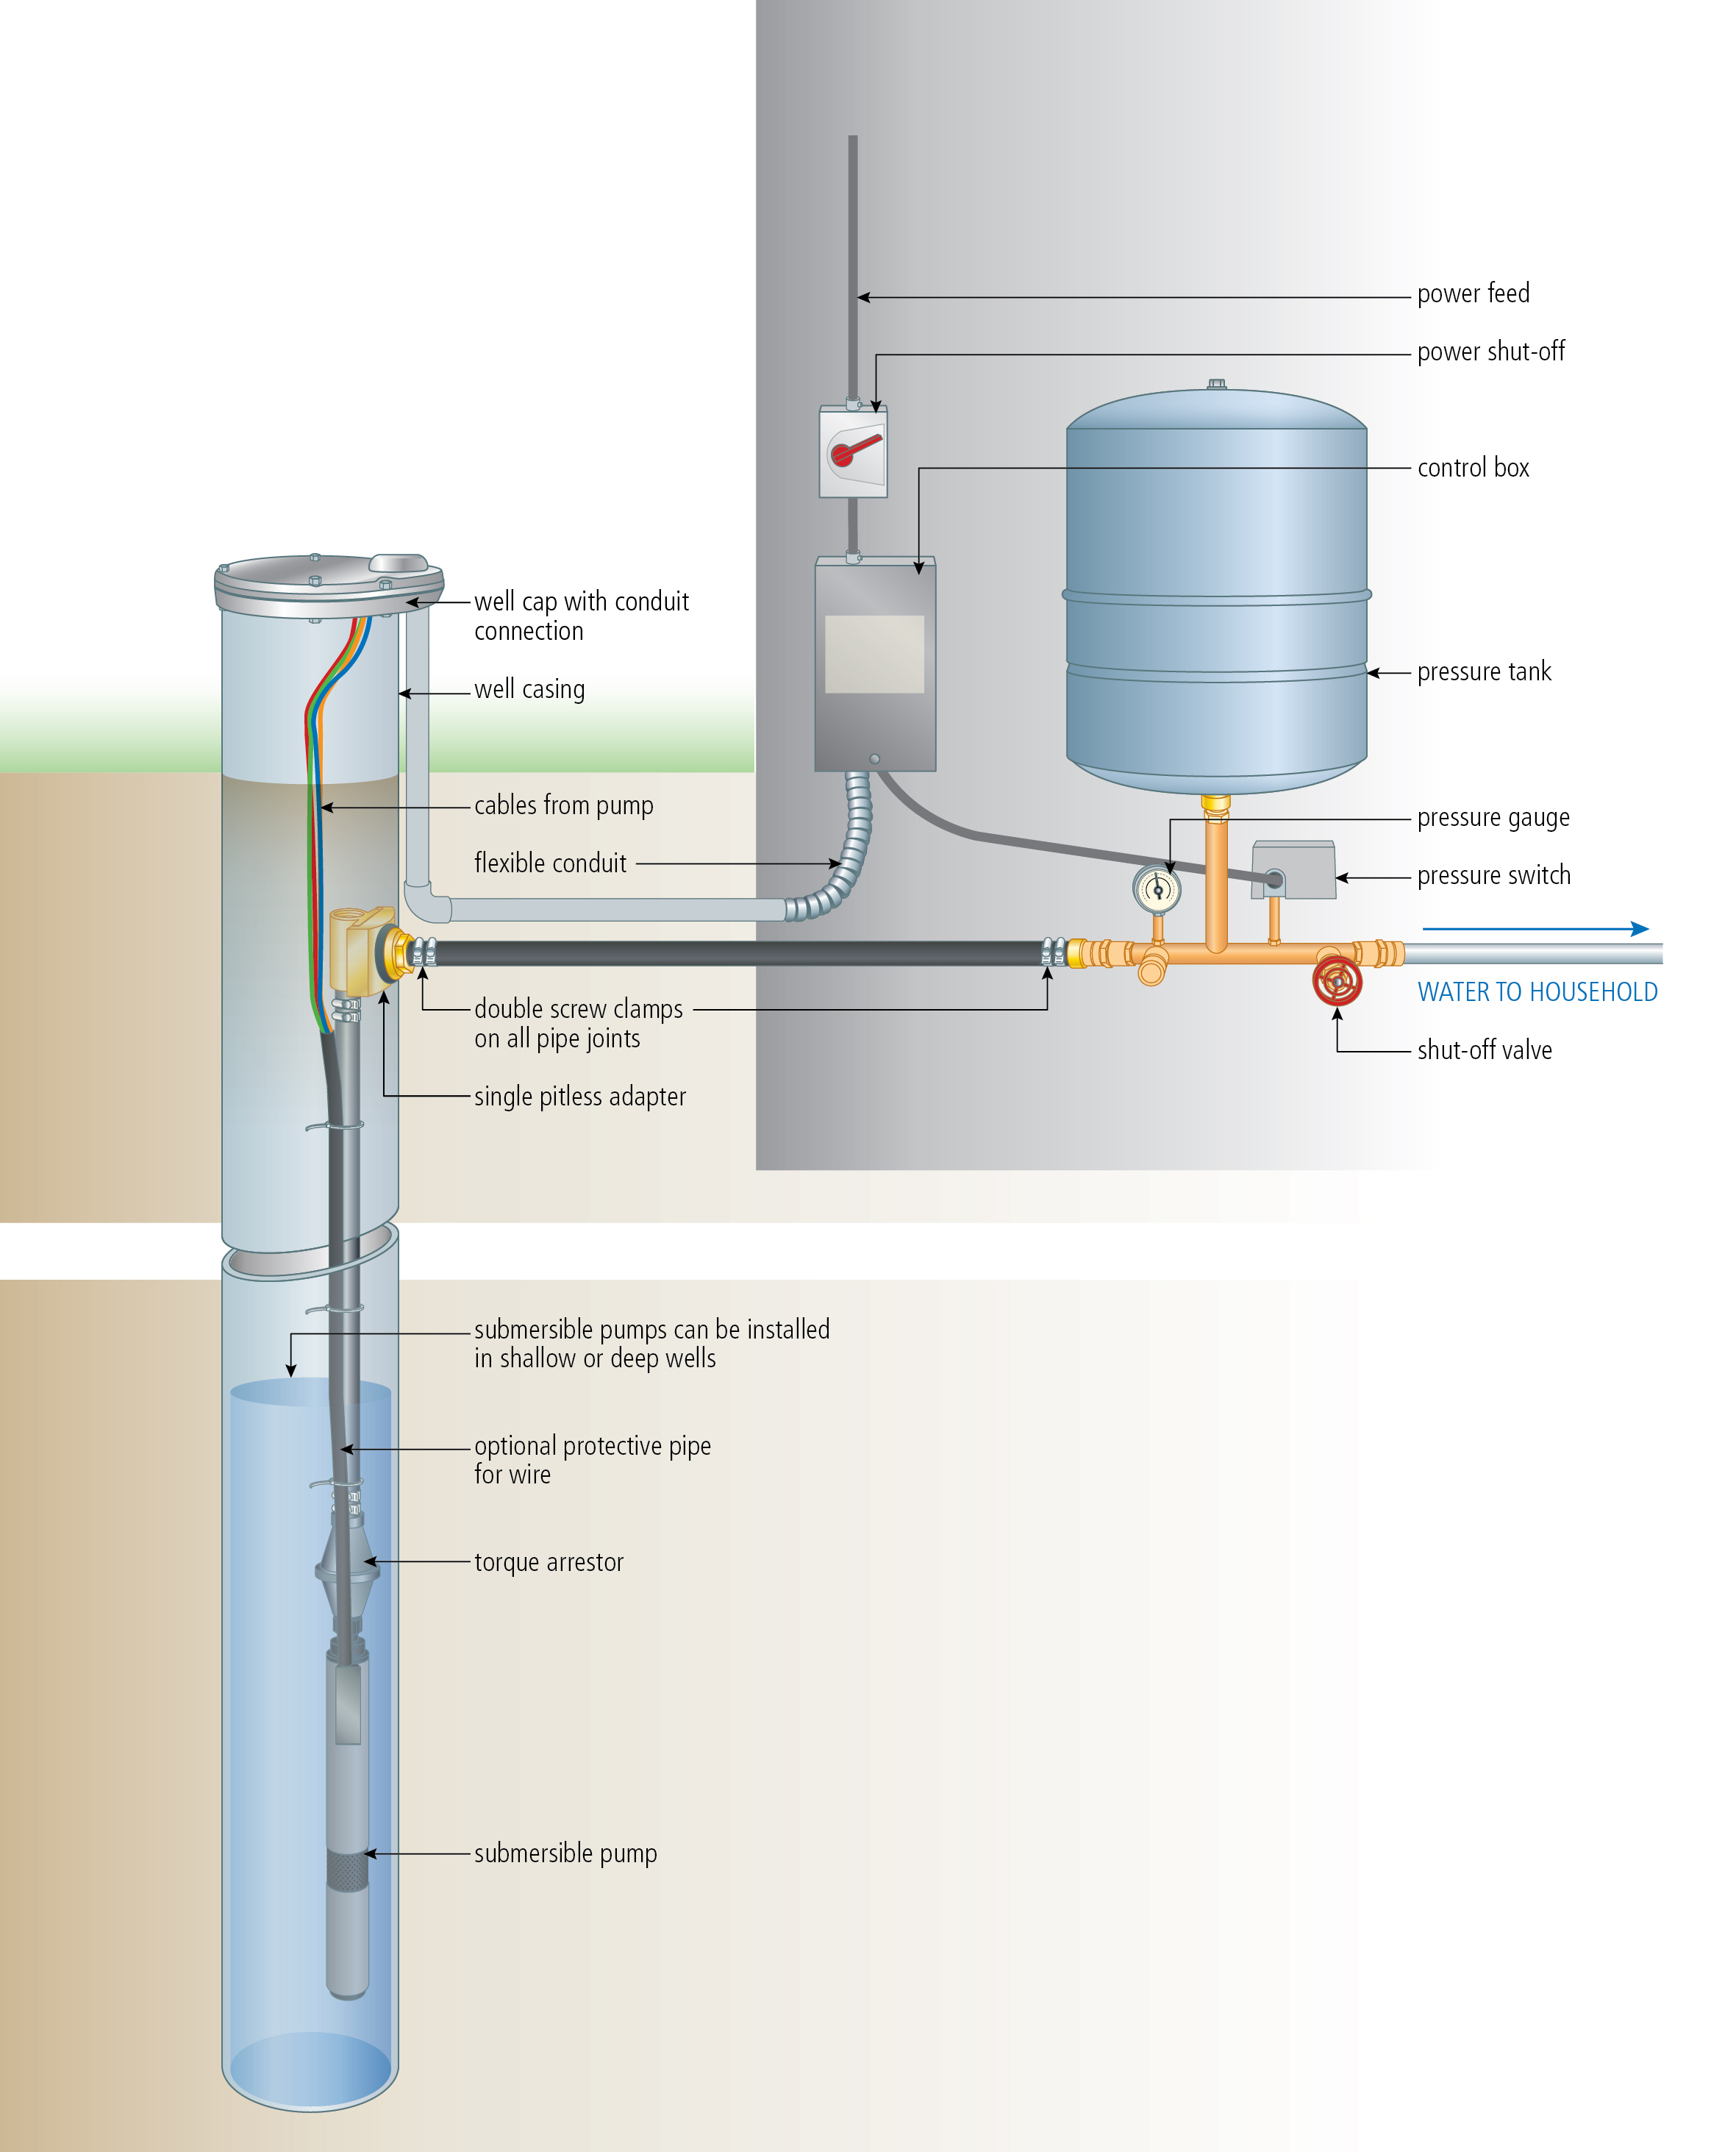 Install A Submersible Pump: 6 Lessons For Doing It Right - Submersible Well Pump Wiring Diagram